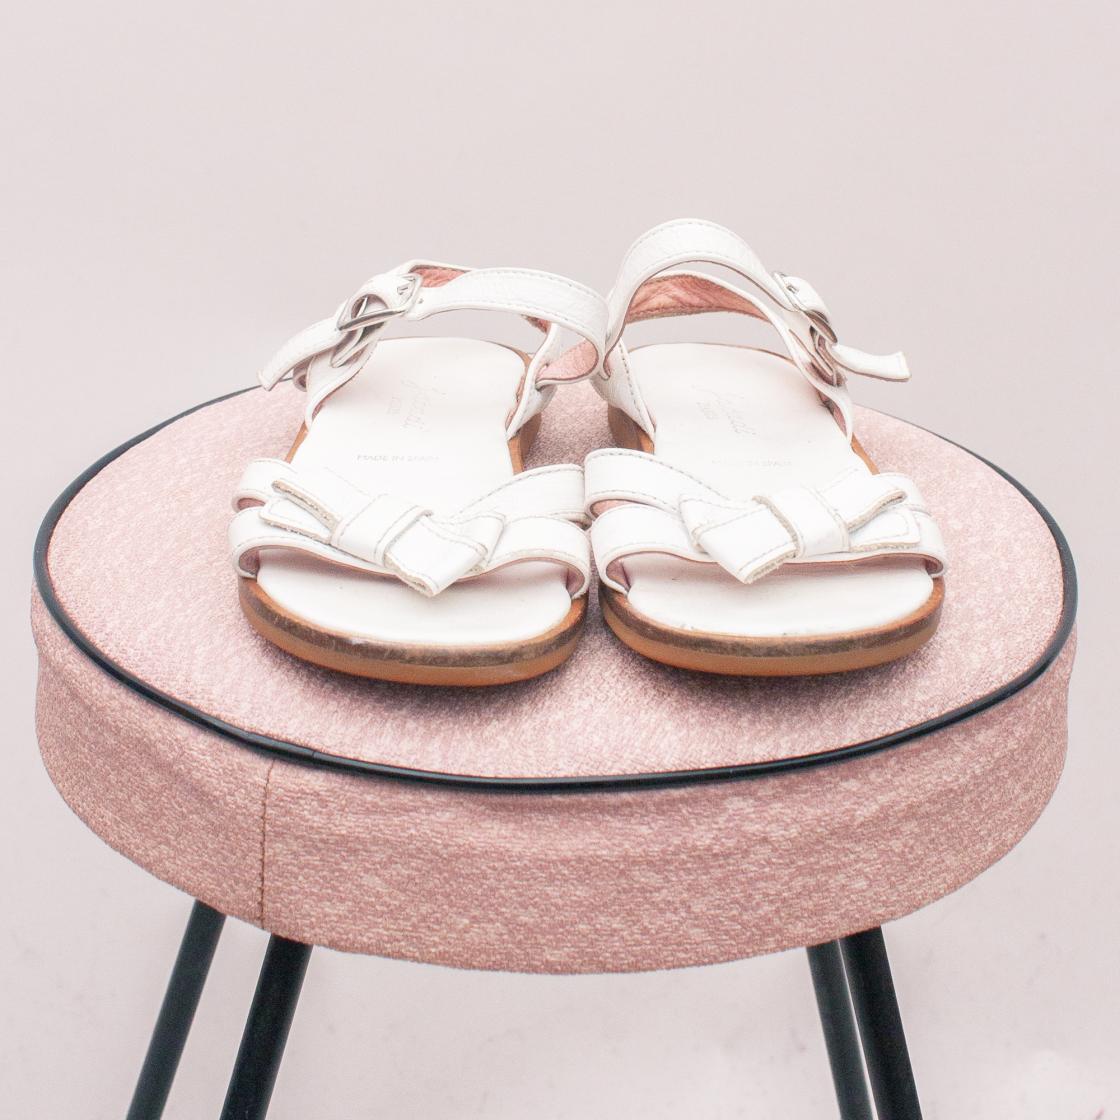 Jacadi Leather Sandals - EU 27 (Age 3 Approx.)